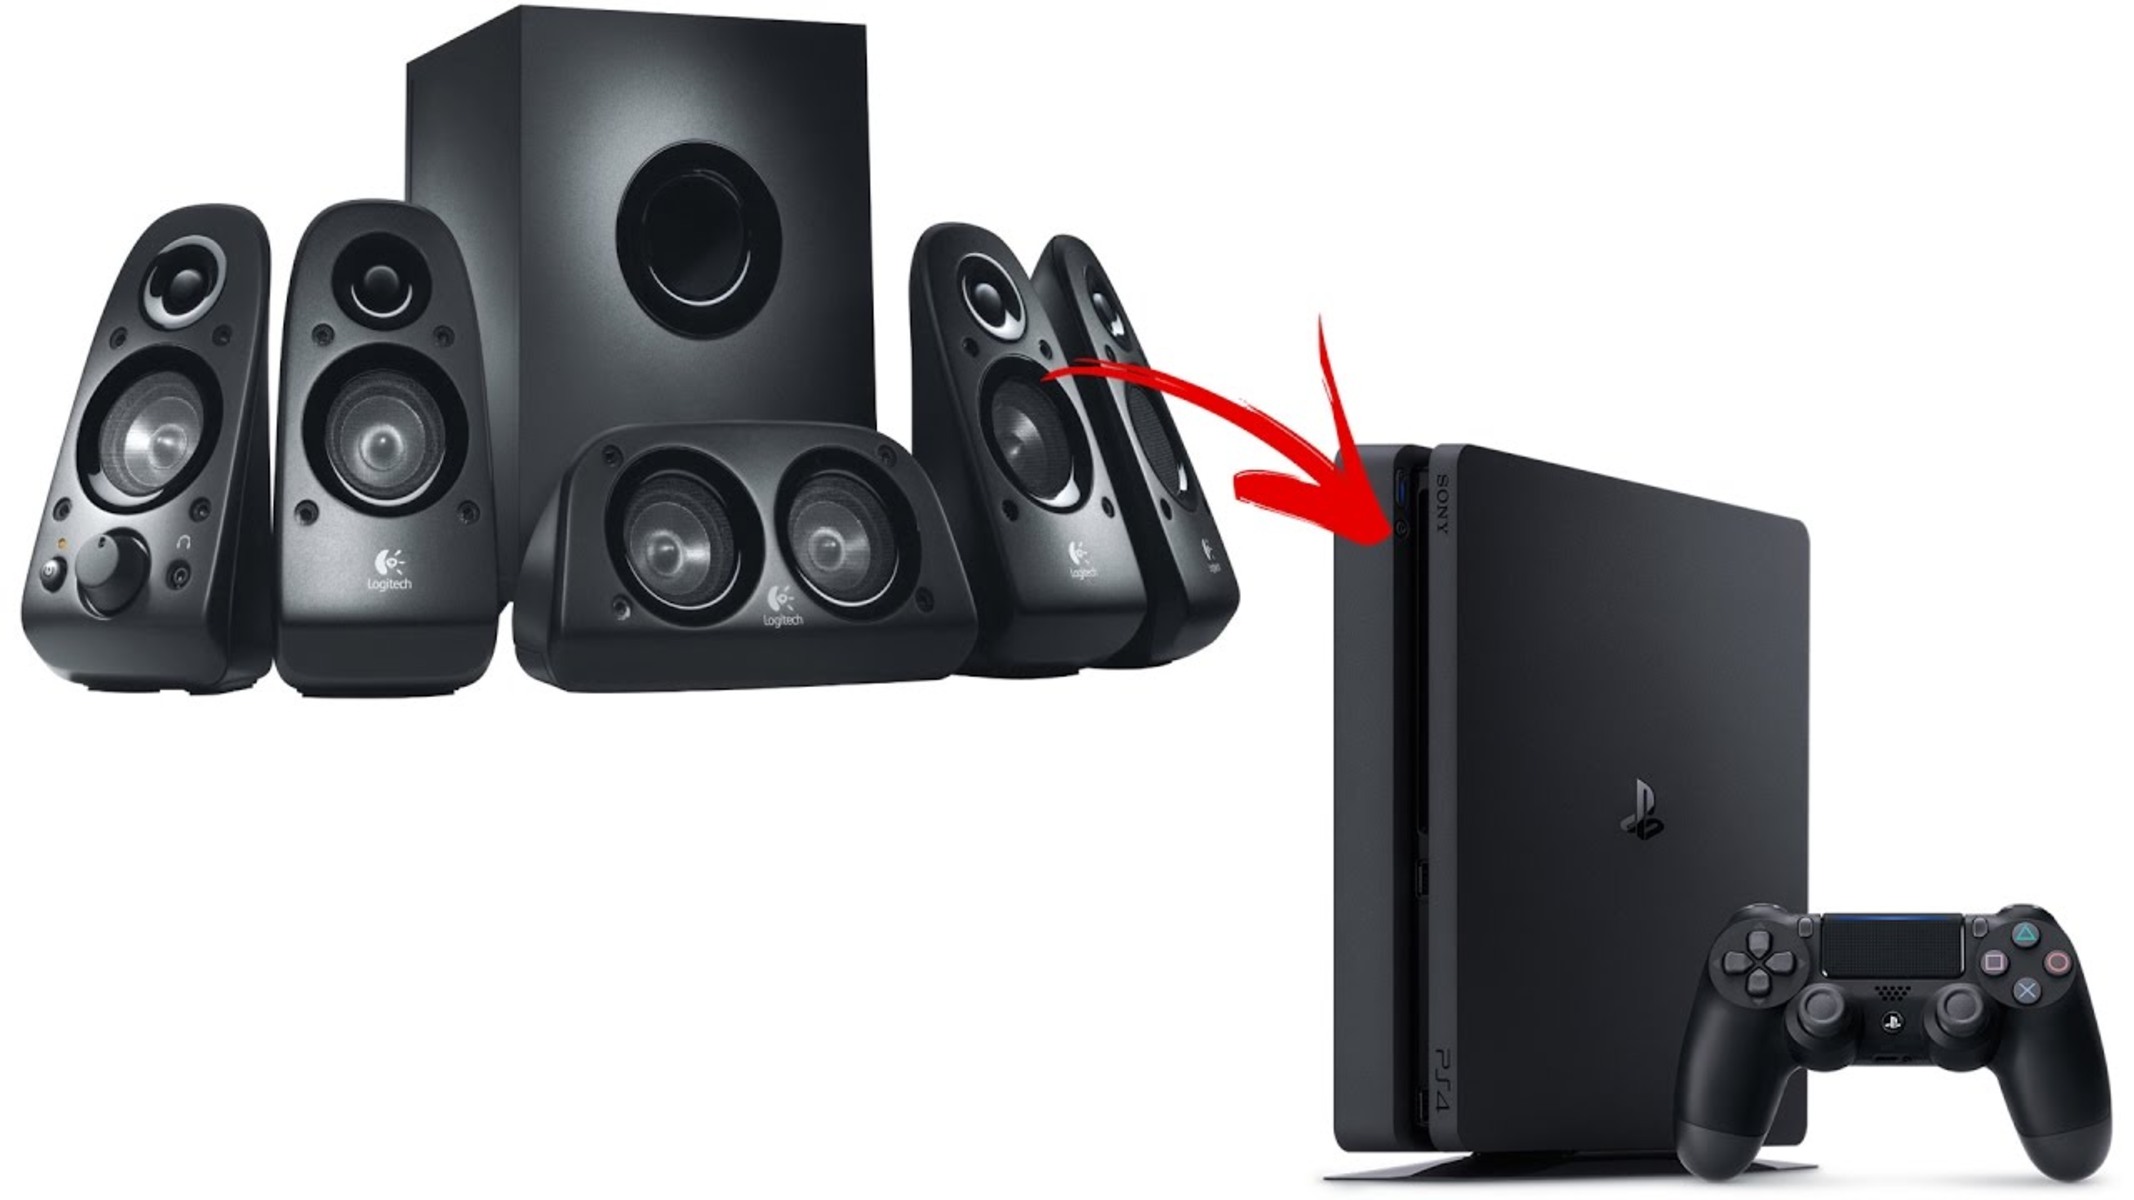 How To Connect A Surround Sound System To A PS4